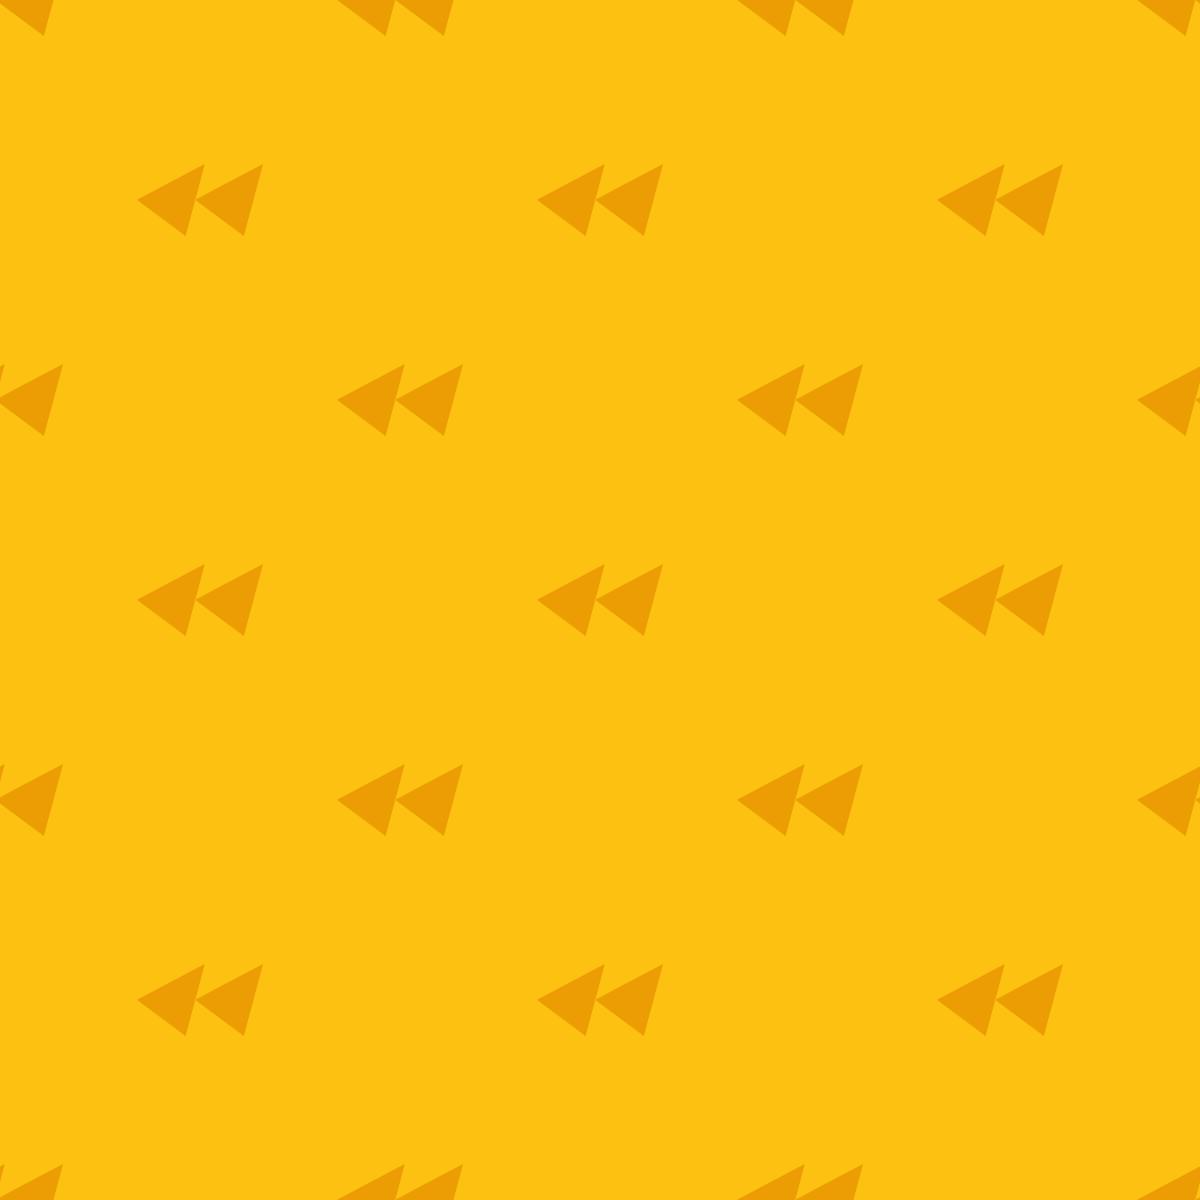 Yellow background with a repeating pattern of the rewind shape